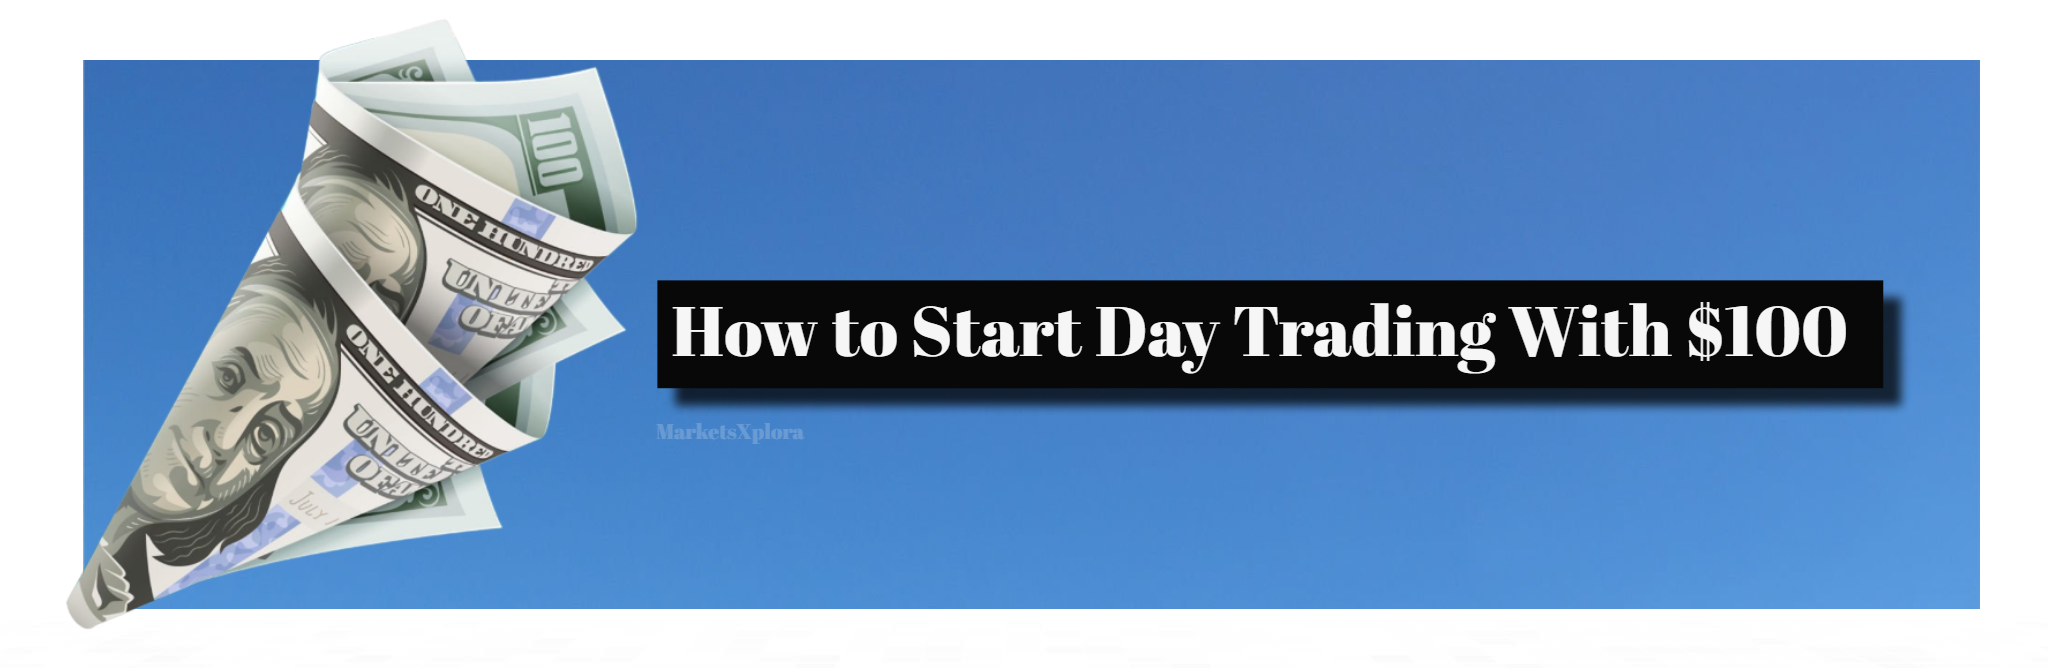 Only have $100 but want to open a day trading account? Here's exactly what skills, tools and platforms are needed to begin trading with just hundred dollars.